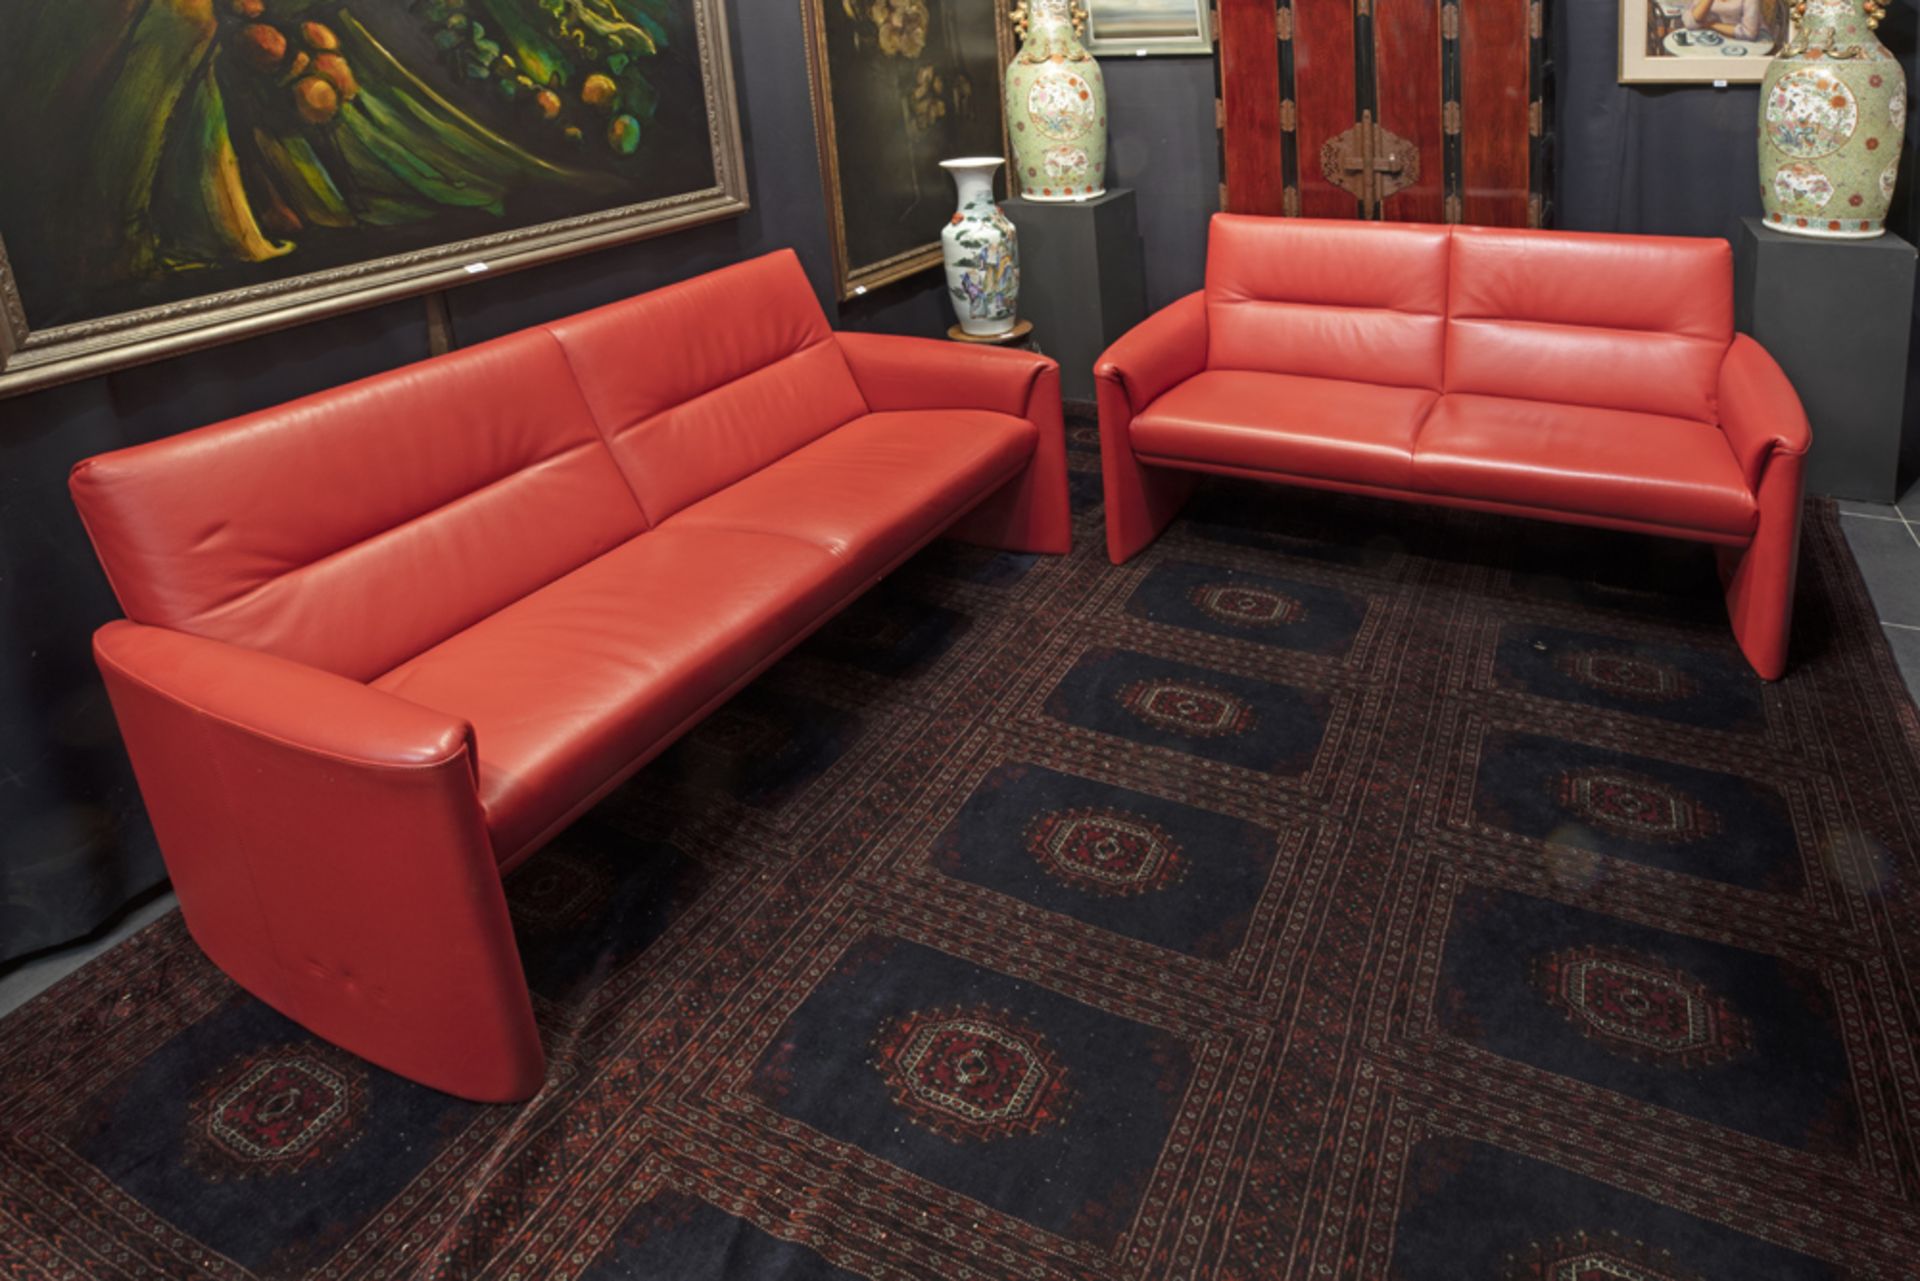 pair of red leather design two seats sofas - marked with an ID number || Paar design tweezitsofa's